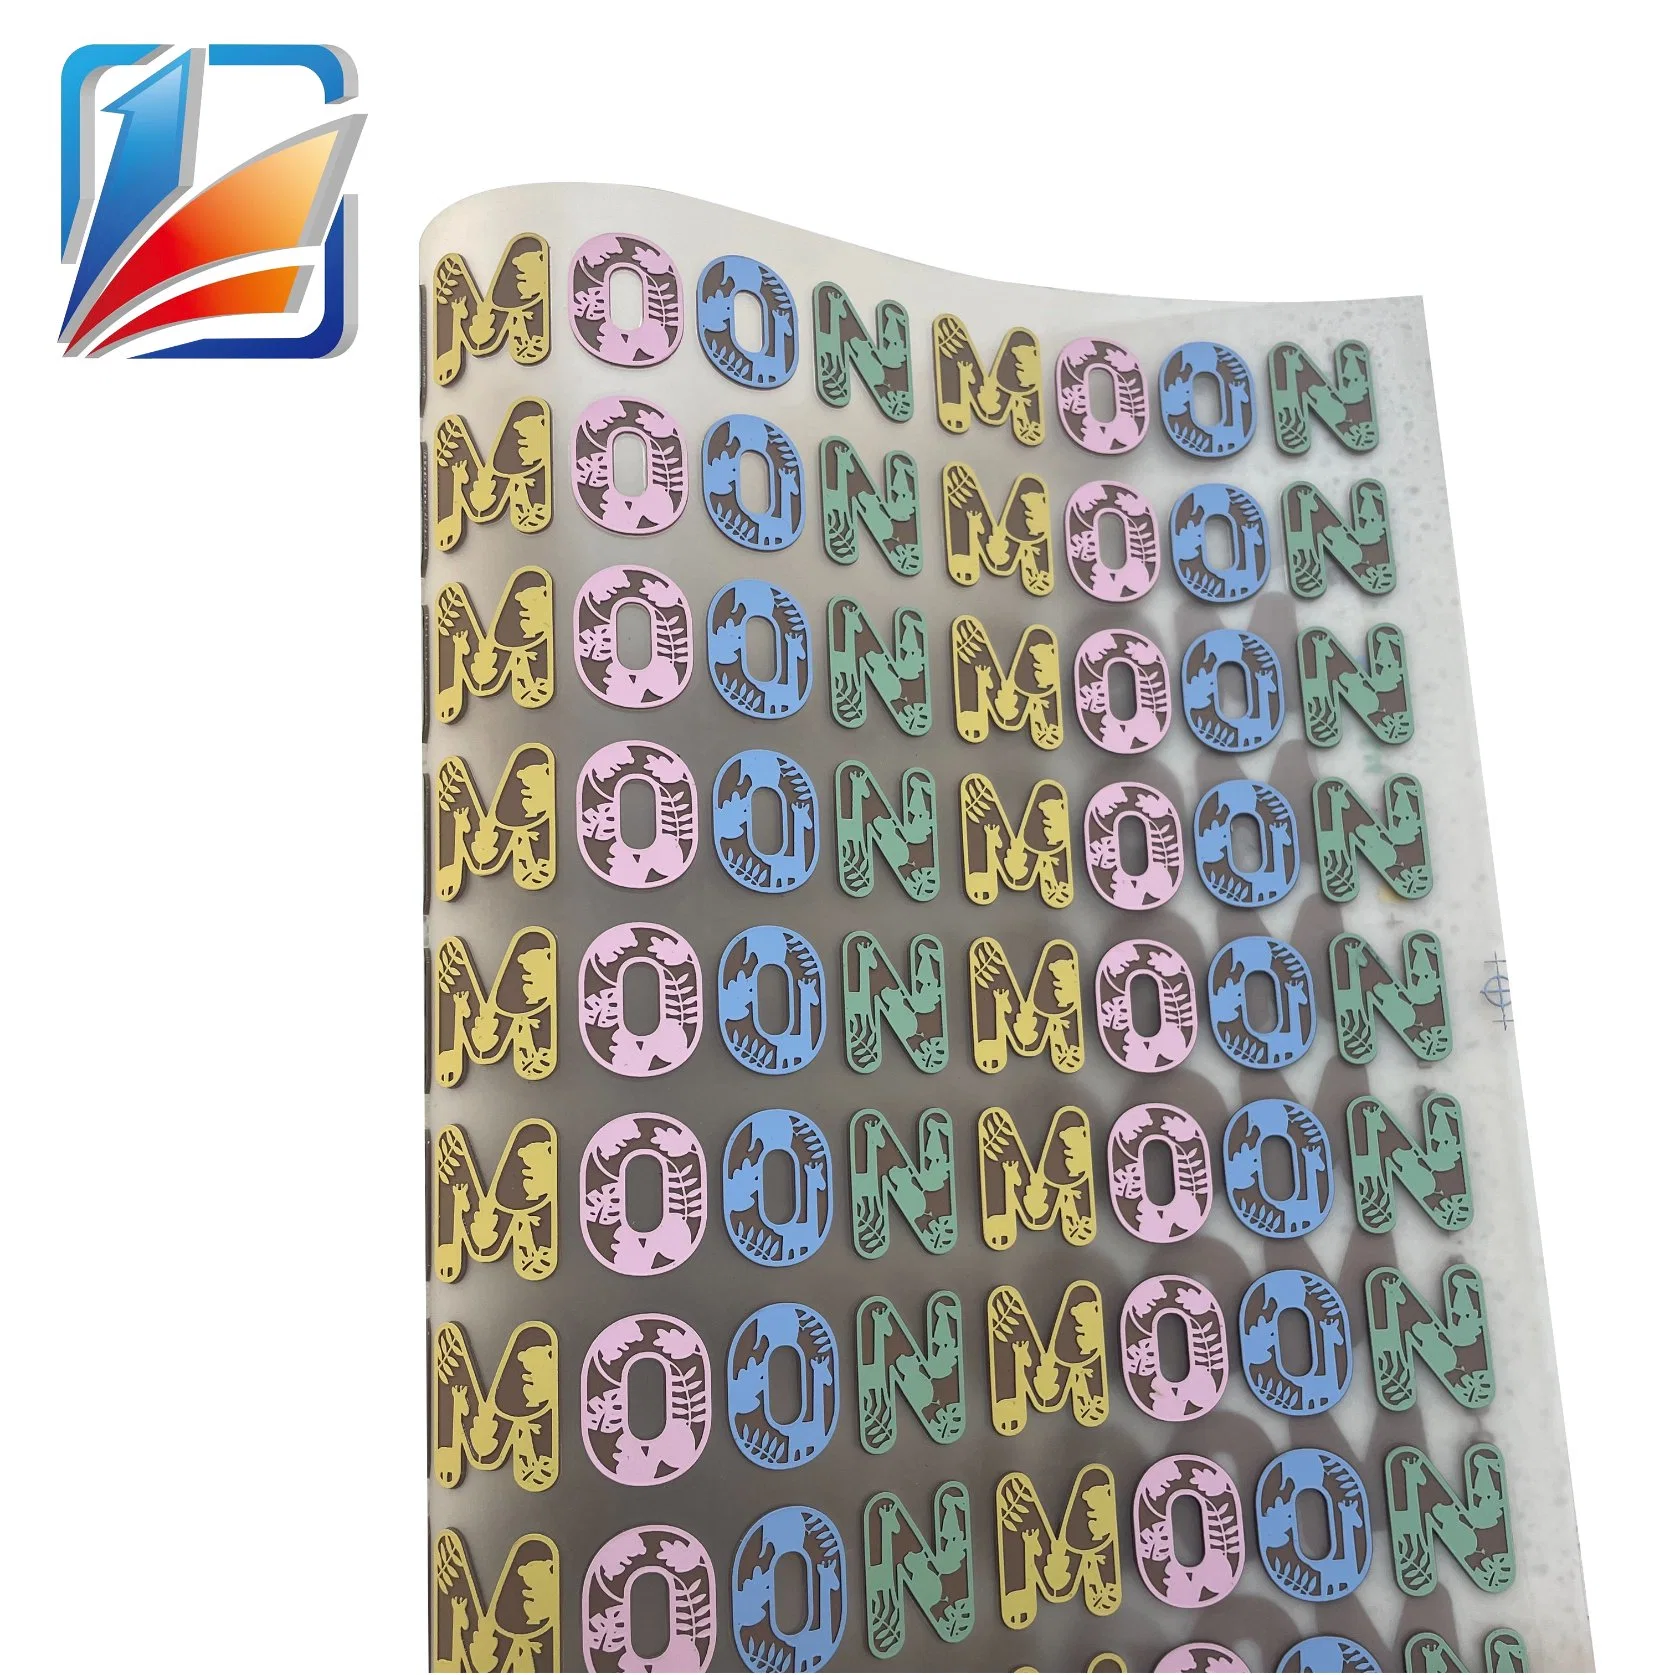 3D Mold Silicon Rubber Label with Heat Transfer for Garment Clothes